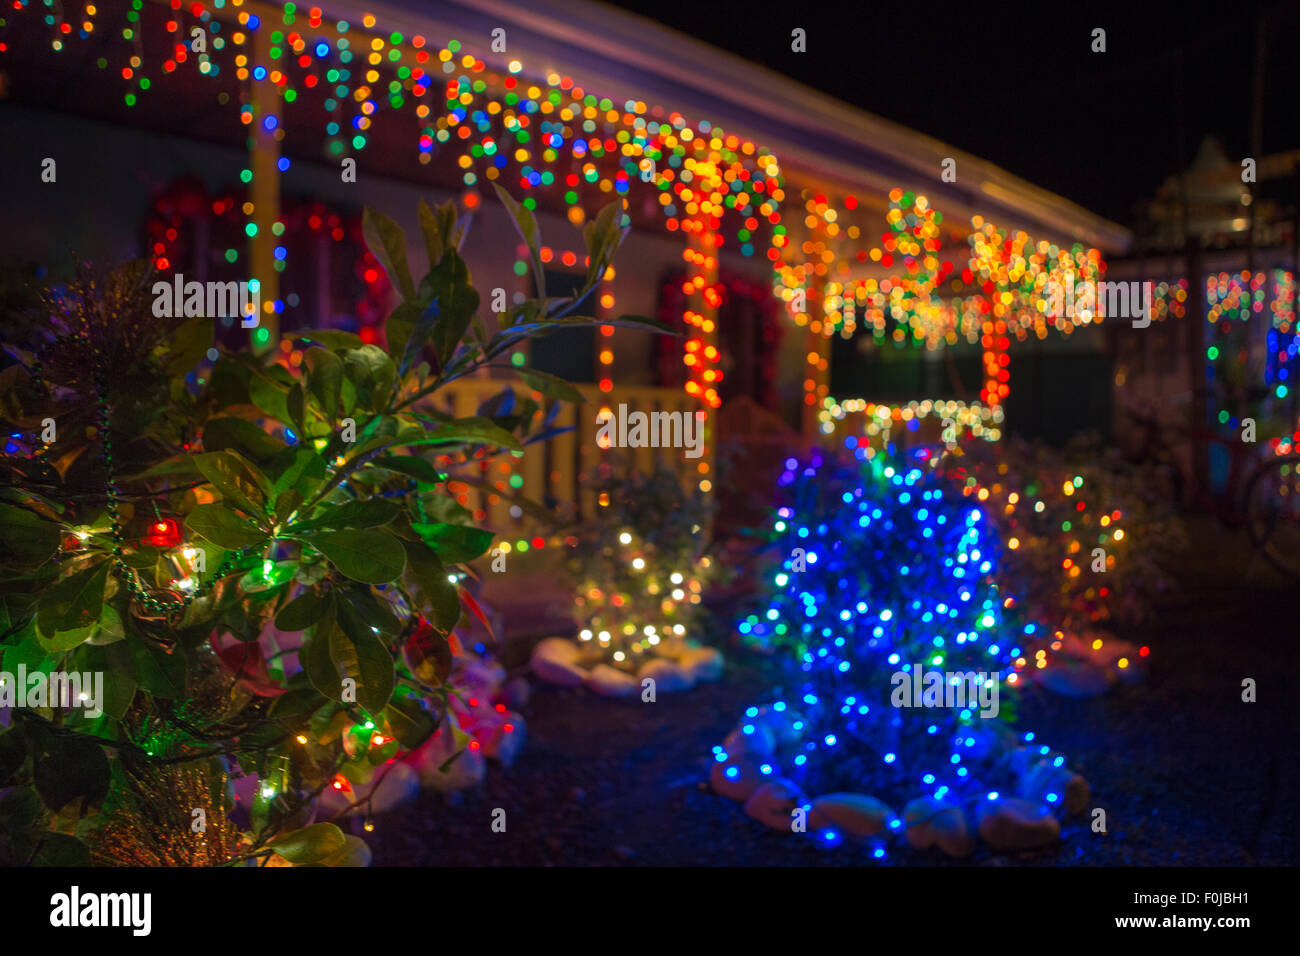 Abstract Christmas background, lights on trees and plants, Puerto Viejo, Caraïbe, Costa Rica 2014. Stock Photo